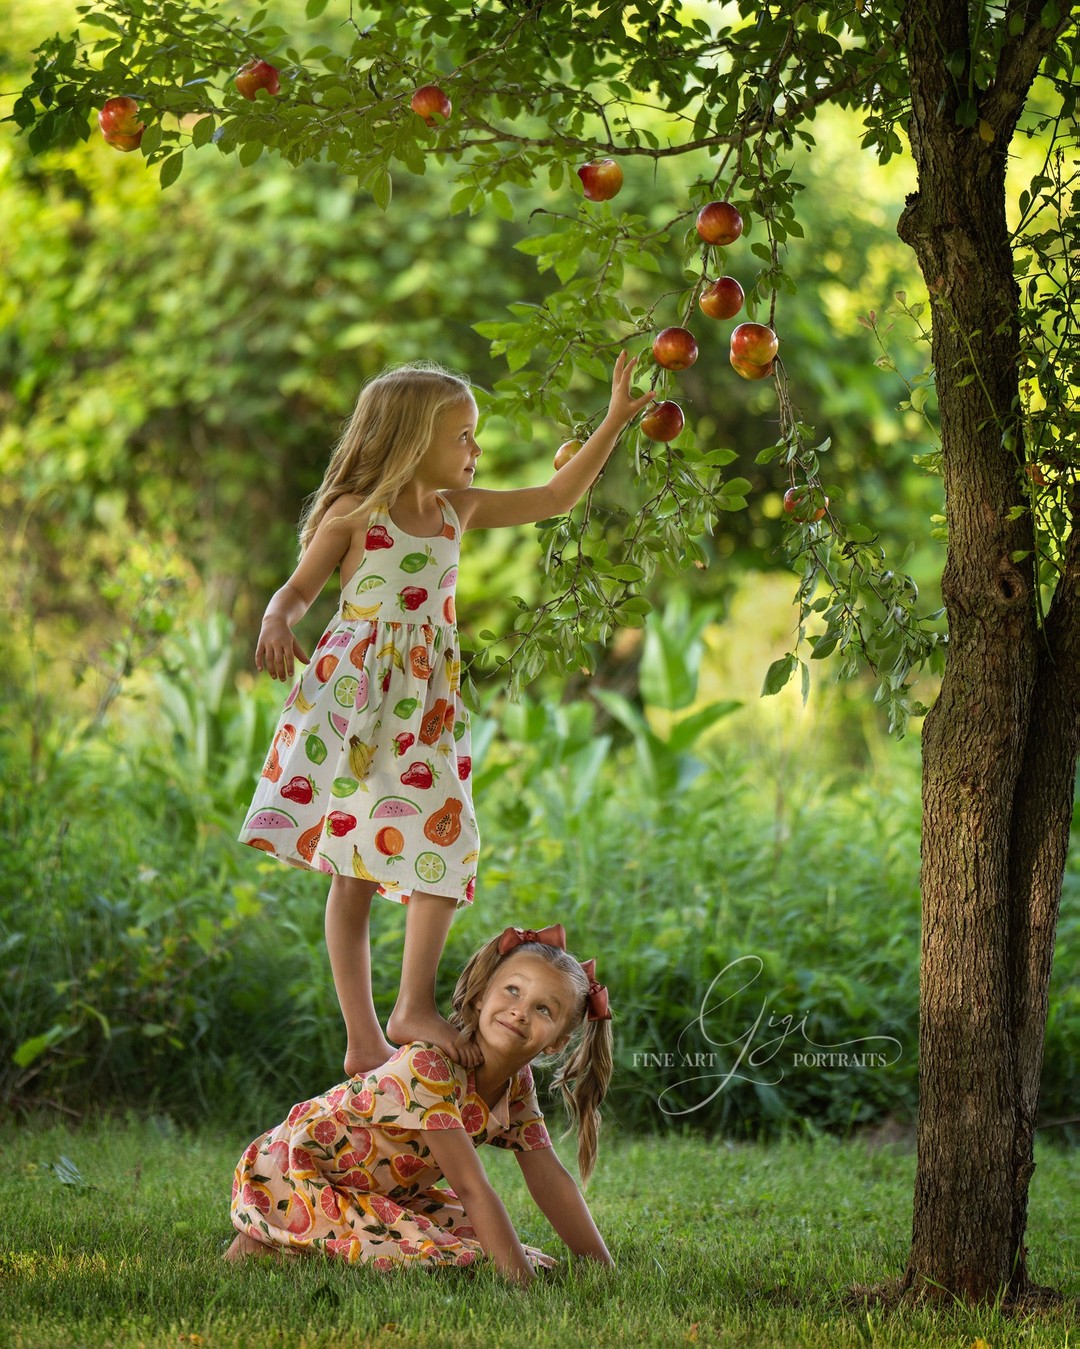 Another image of my darling nieces.  You can always count on your sister to help you out. And you can count on Gigi Fine Art Portraits to put apples on the tree when there aren't any yet! Feel free to share